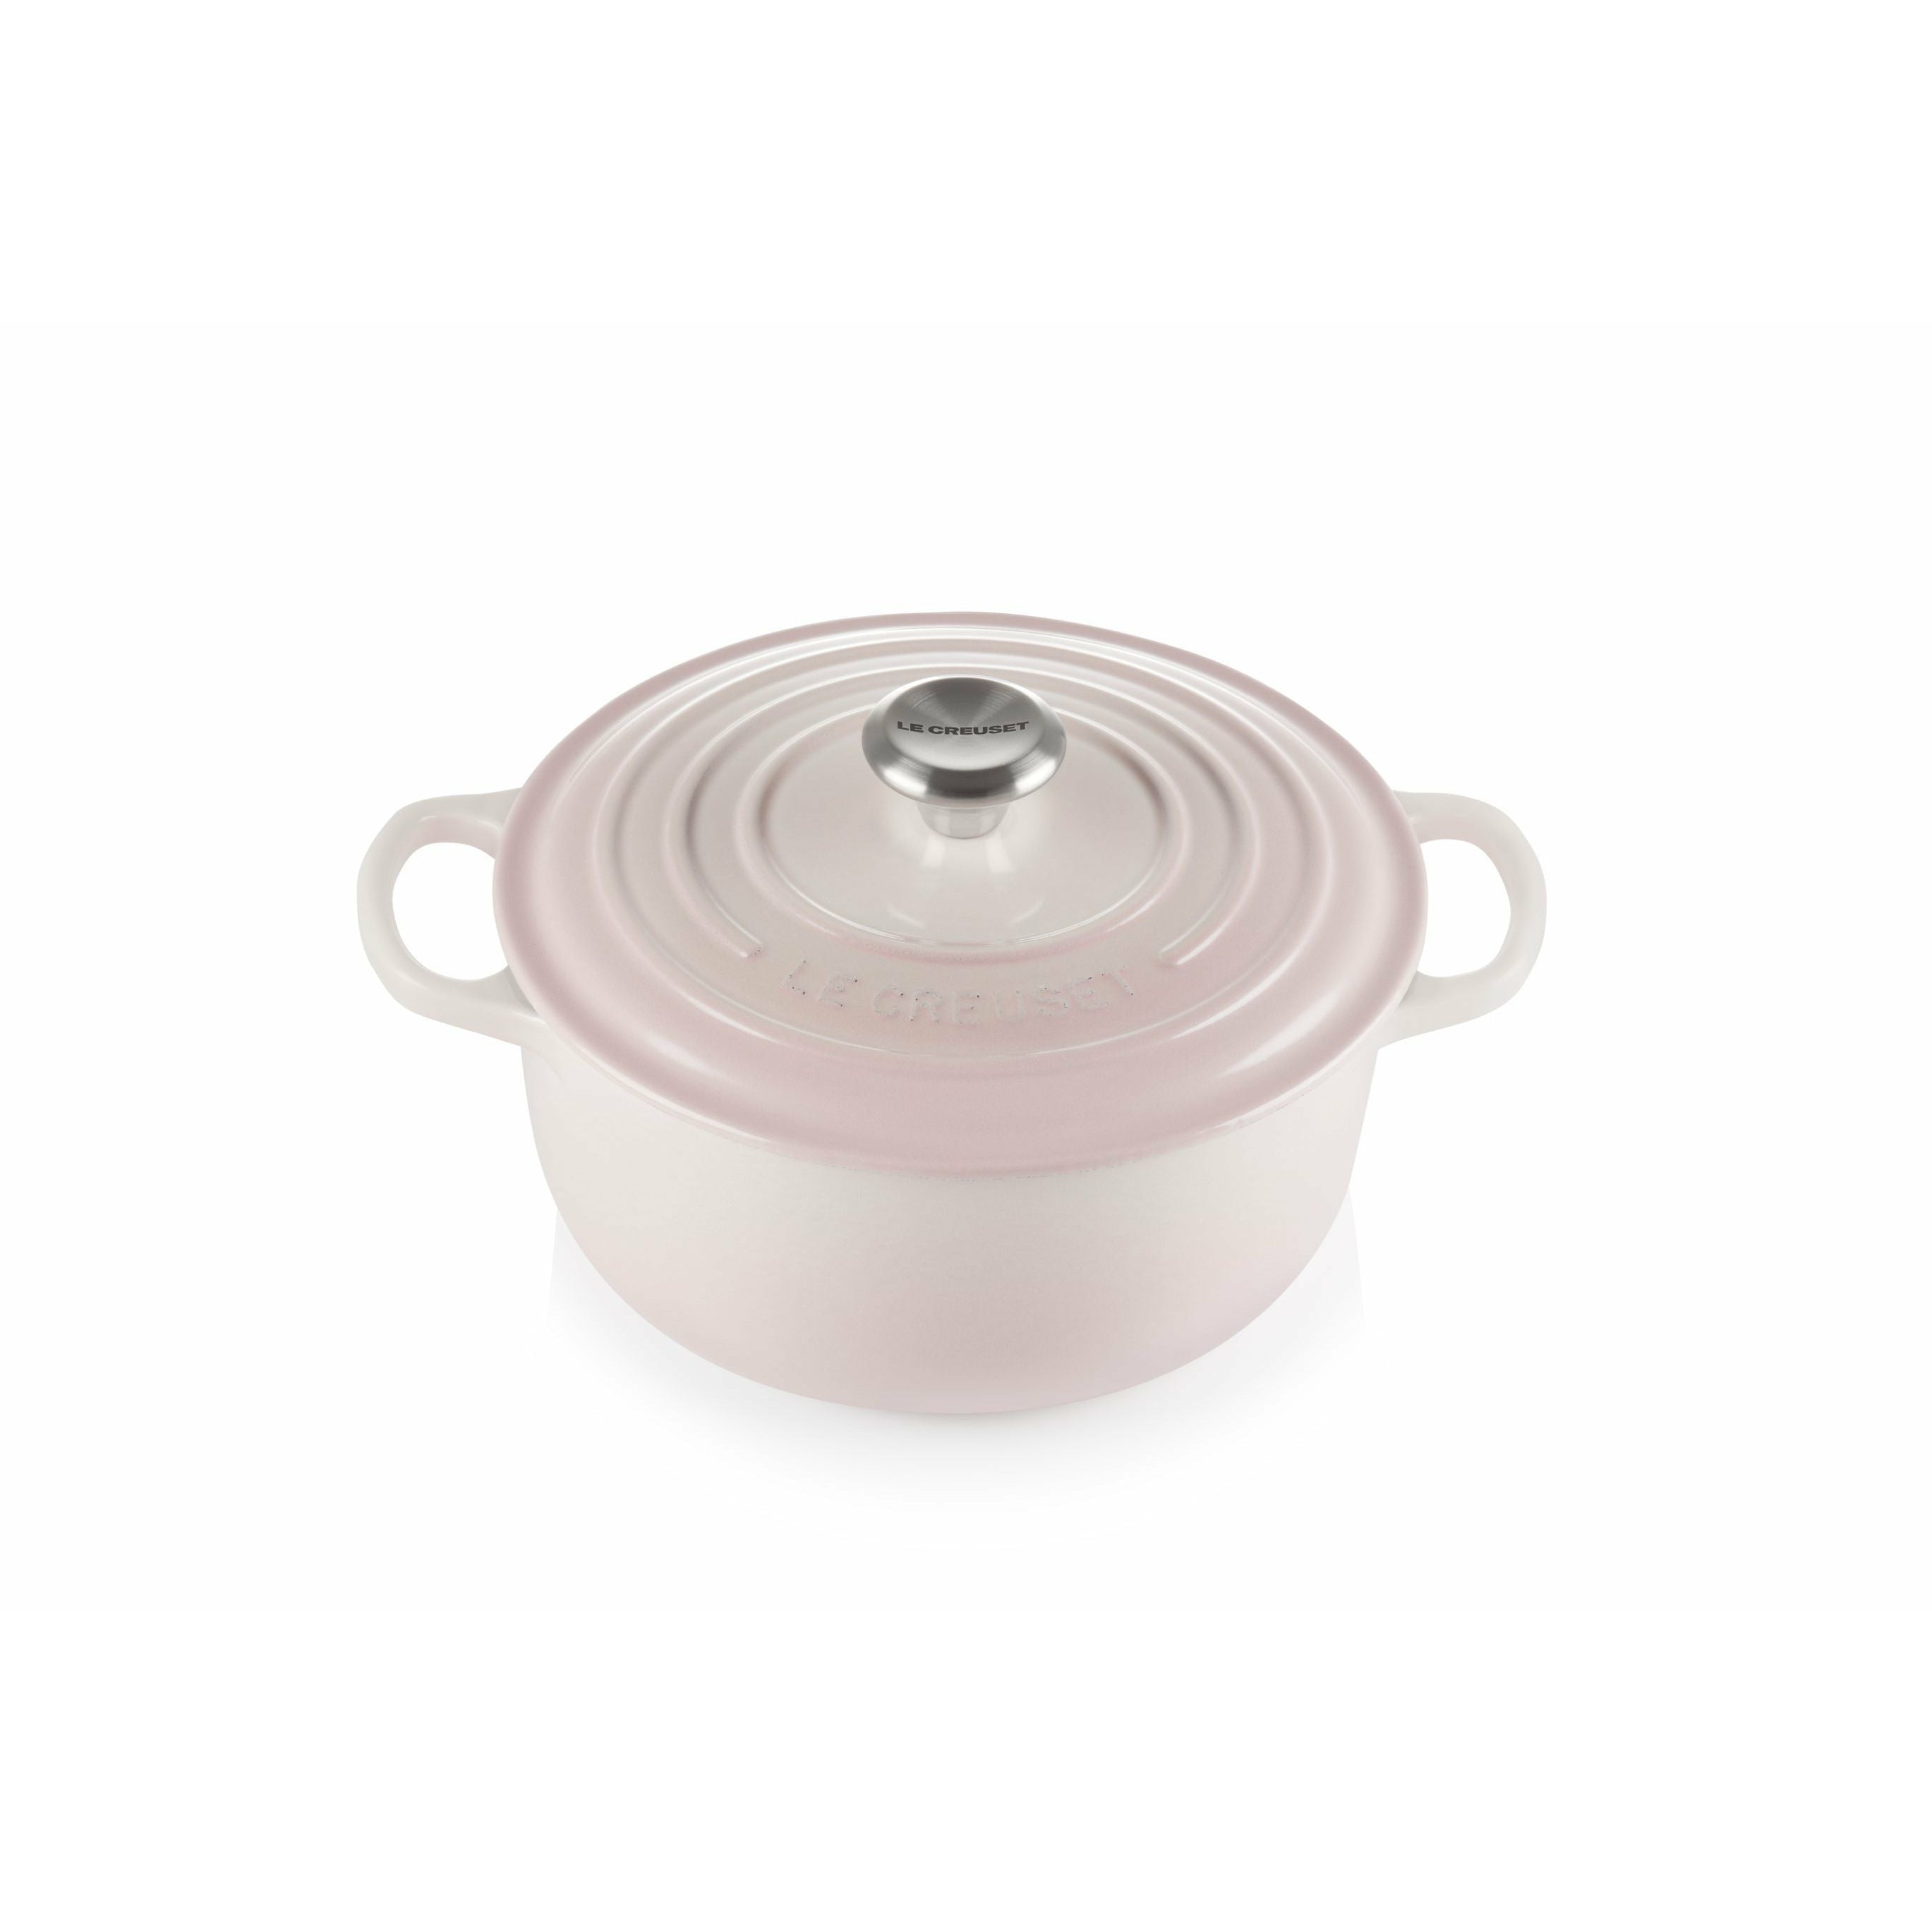 Le Creuset Signature Round Roaster 20 Cm, Shell Pink